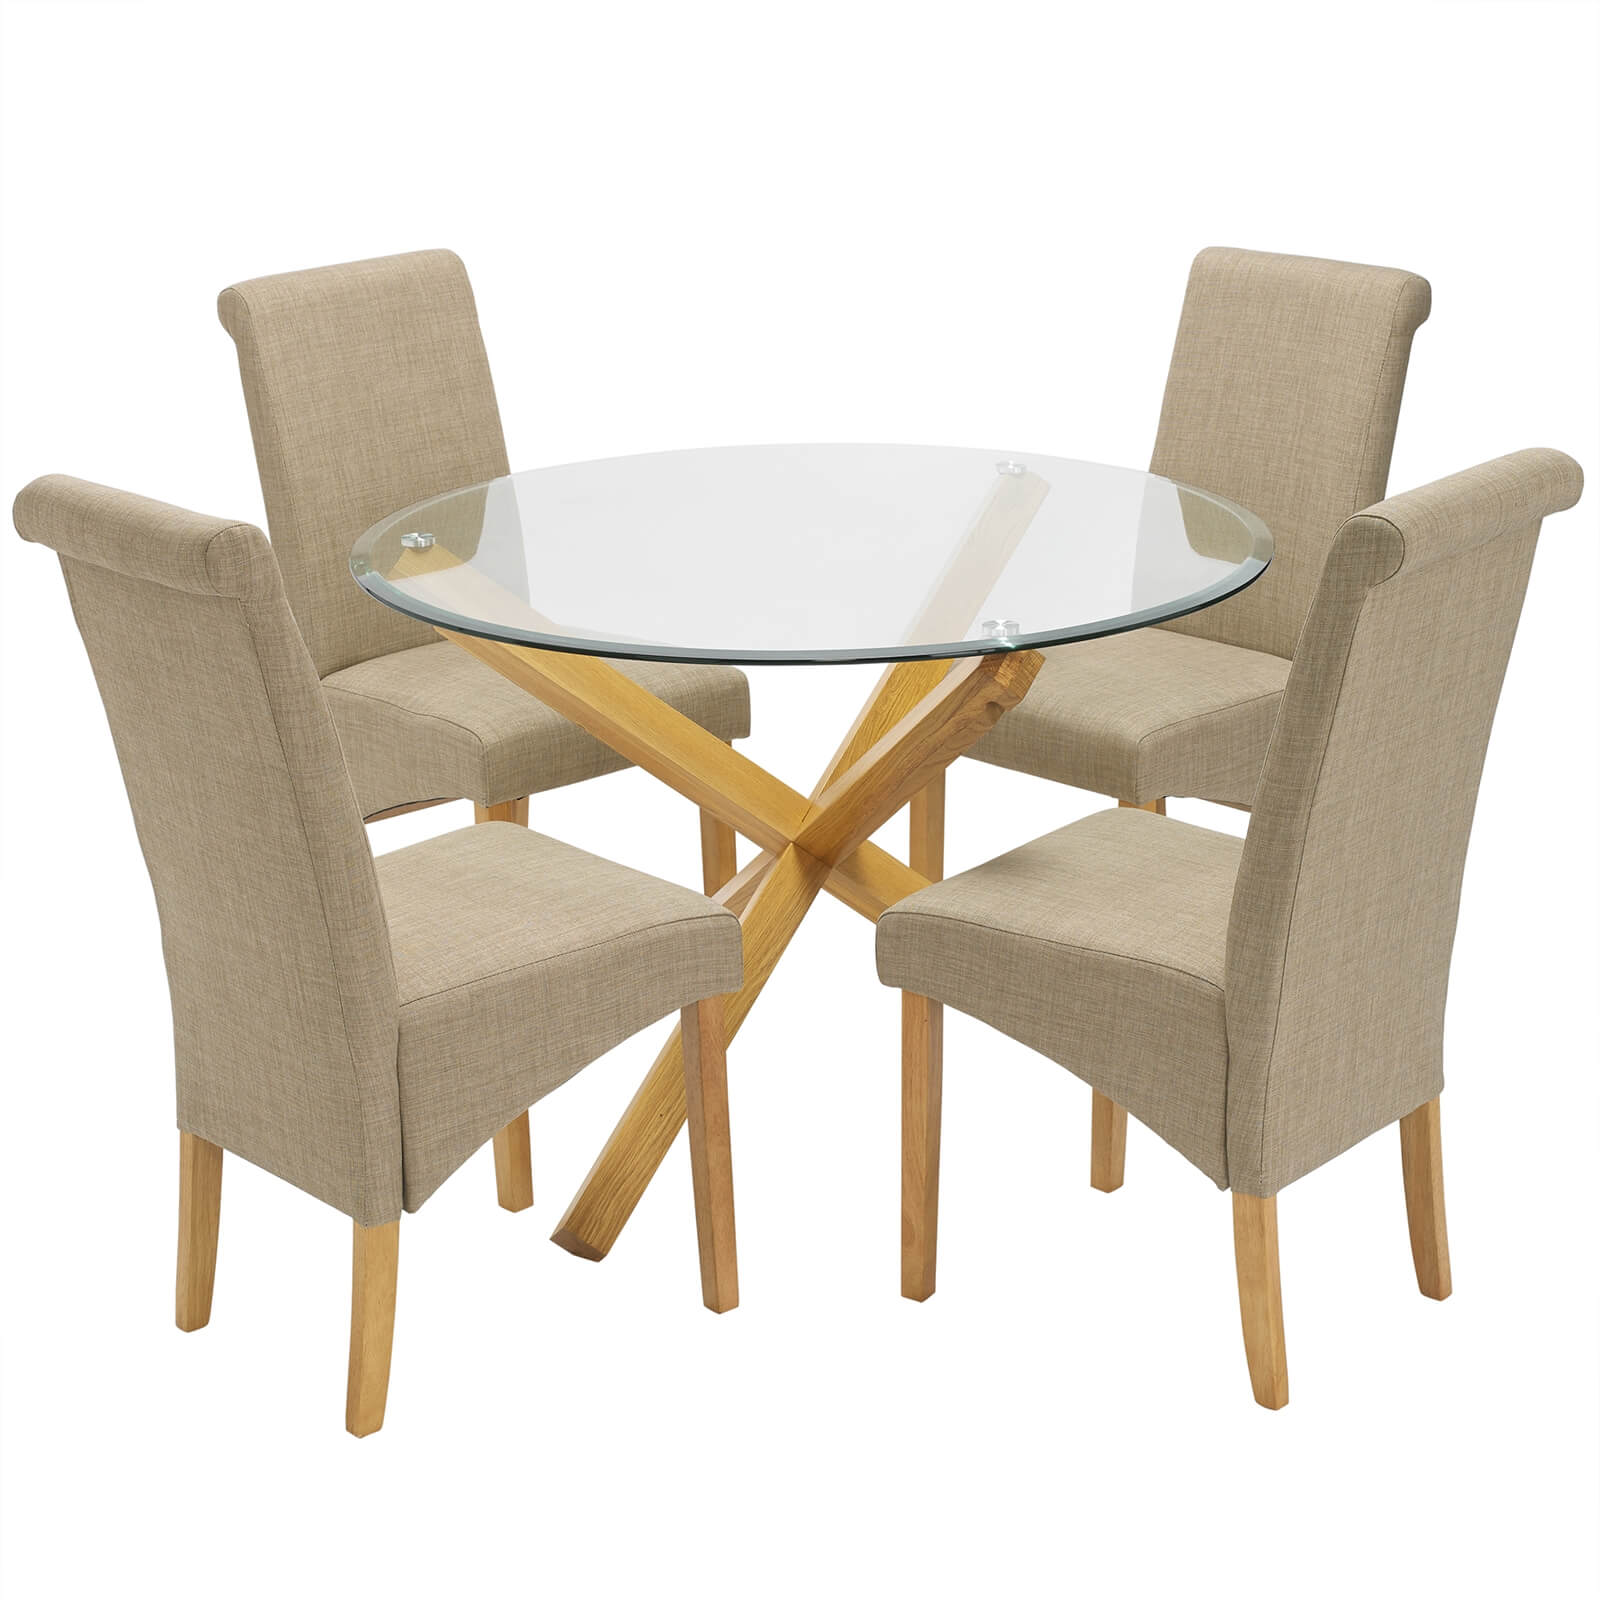 Oporto 4 Seater Dining Set - Amelia Dining Chairs - Beige